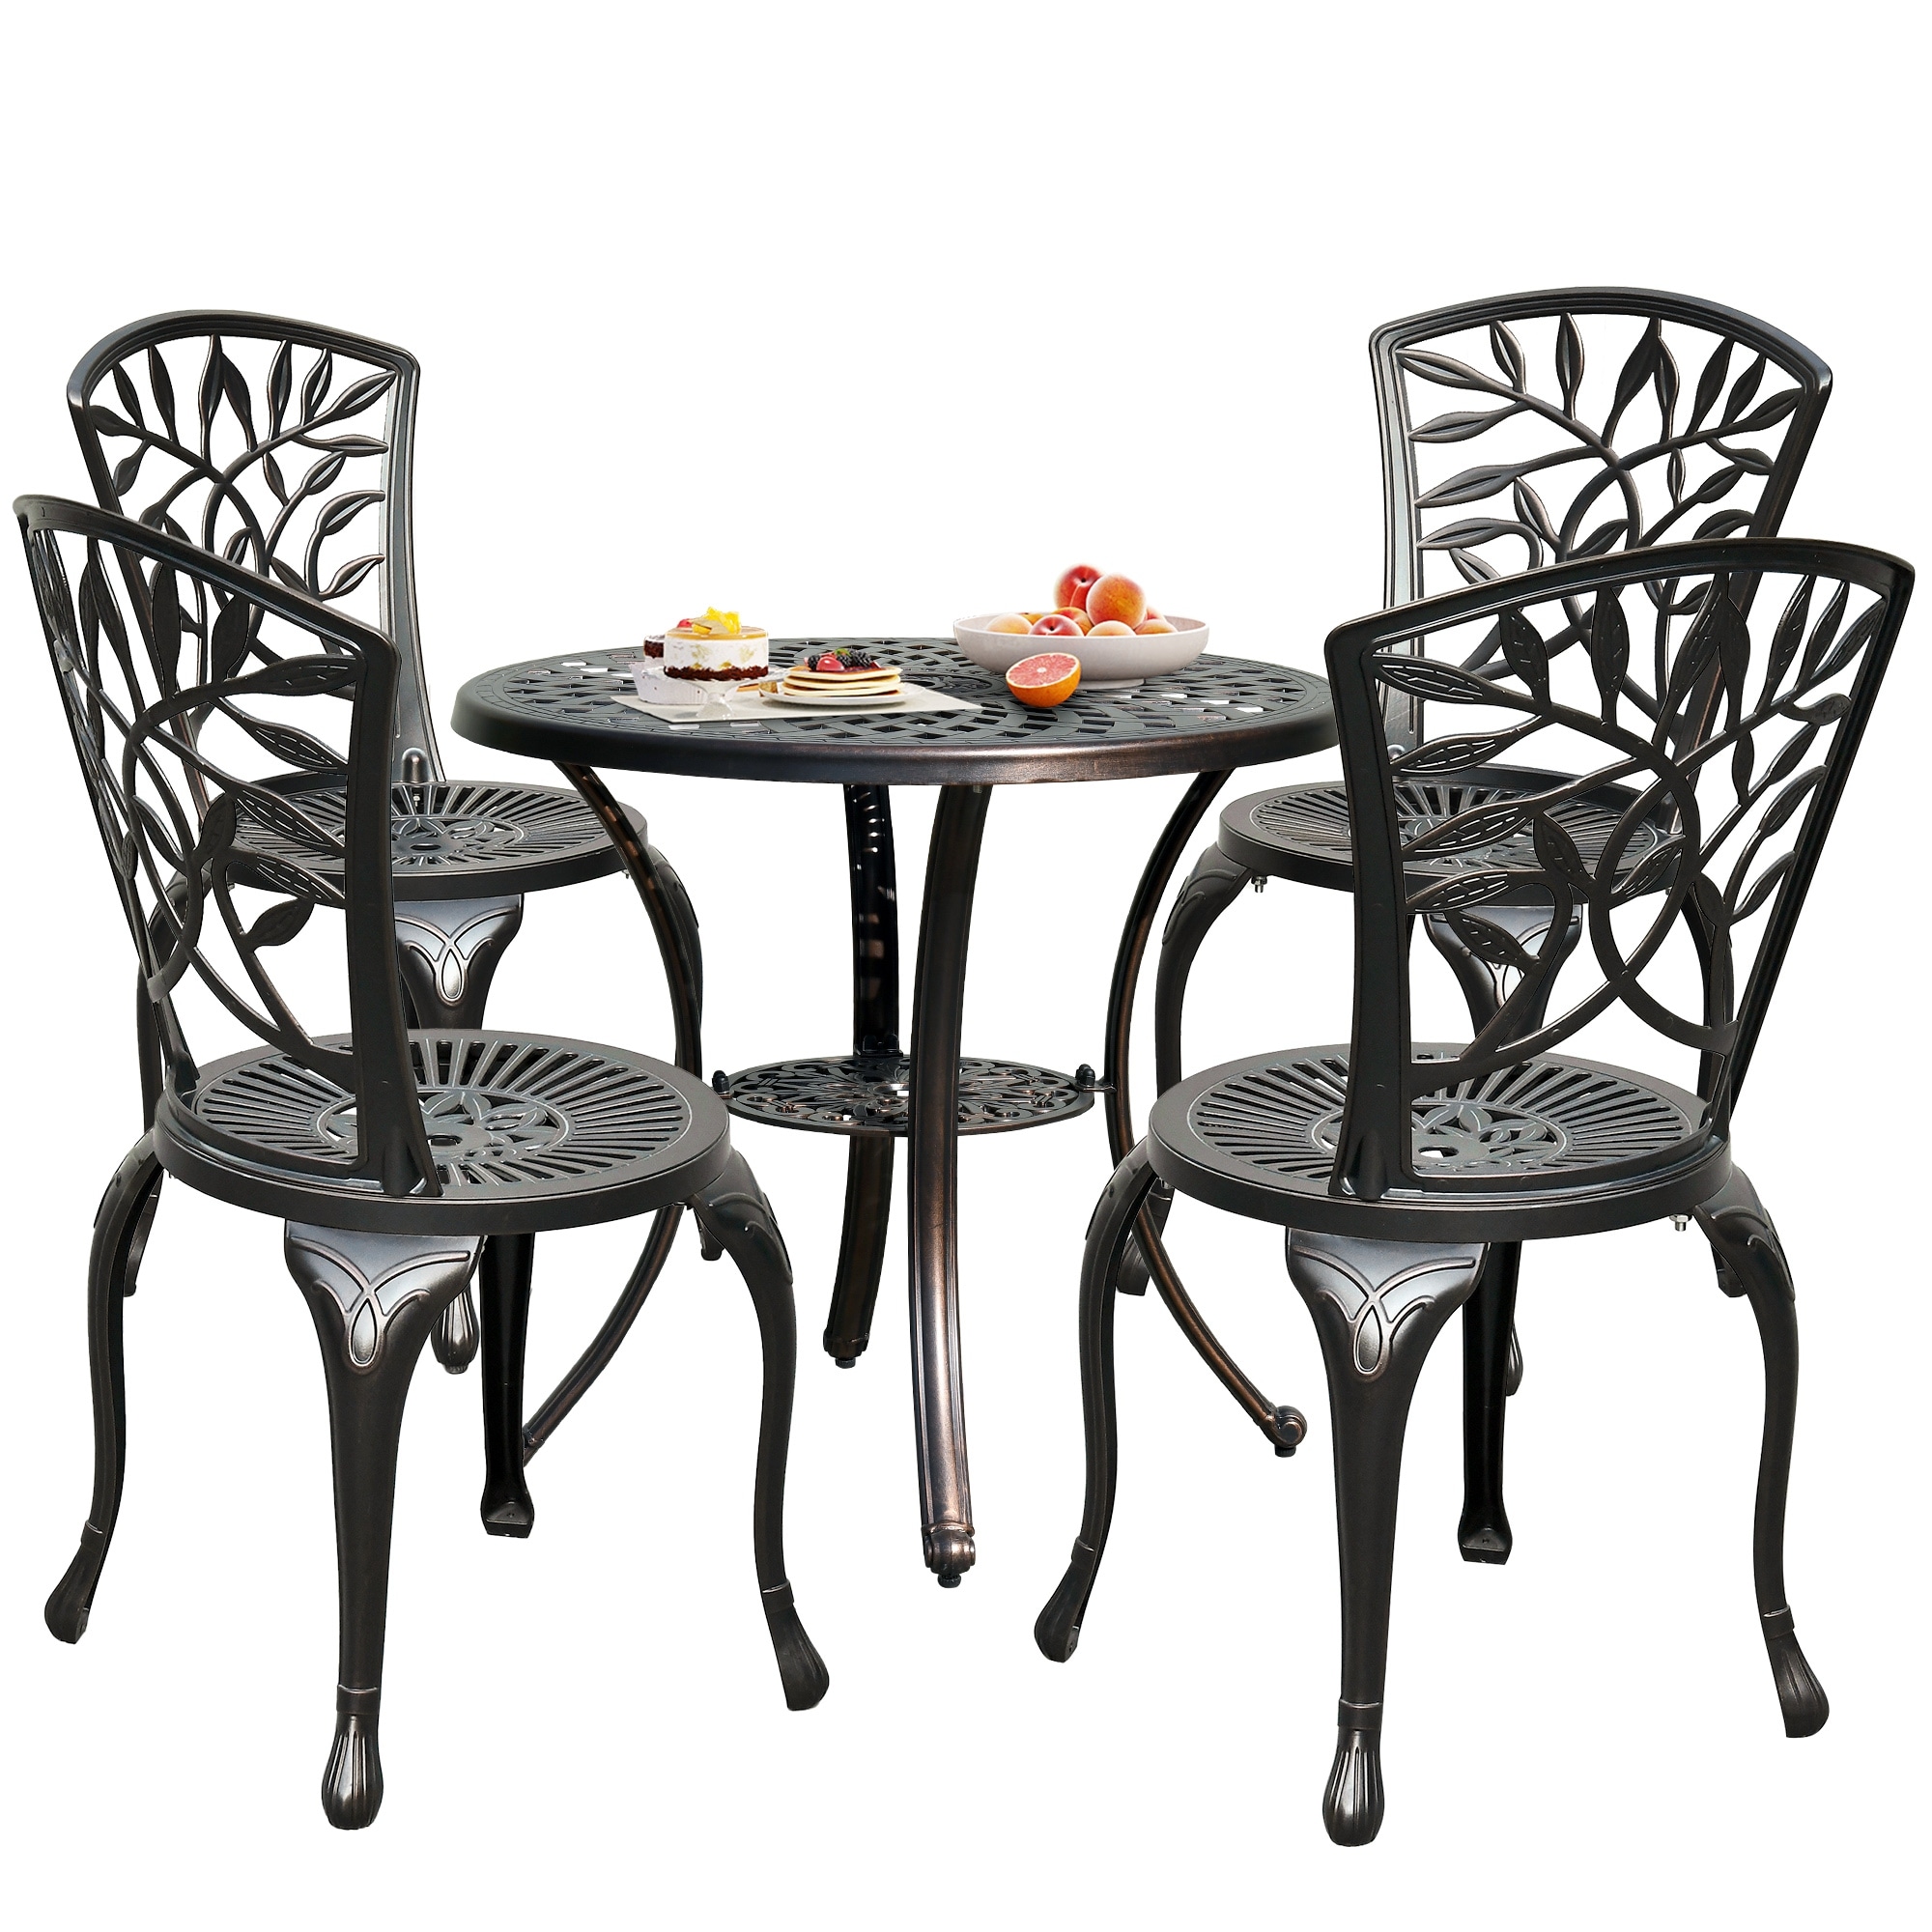 5-piece Outdoor Furniture Cast Aluminum Patio Dining Sets 4 Chairs With Round Table